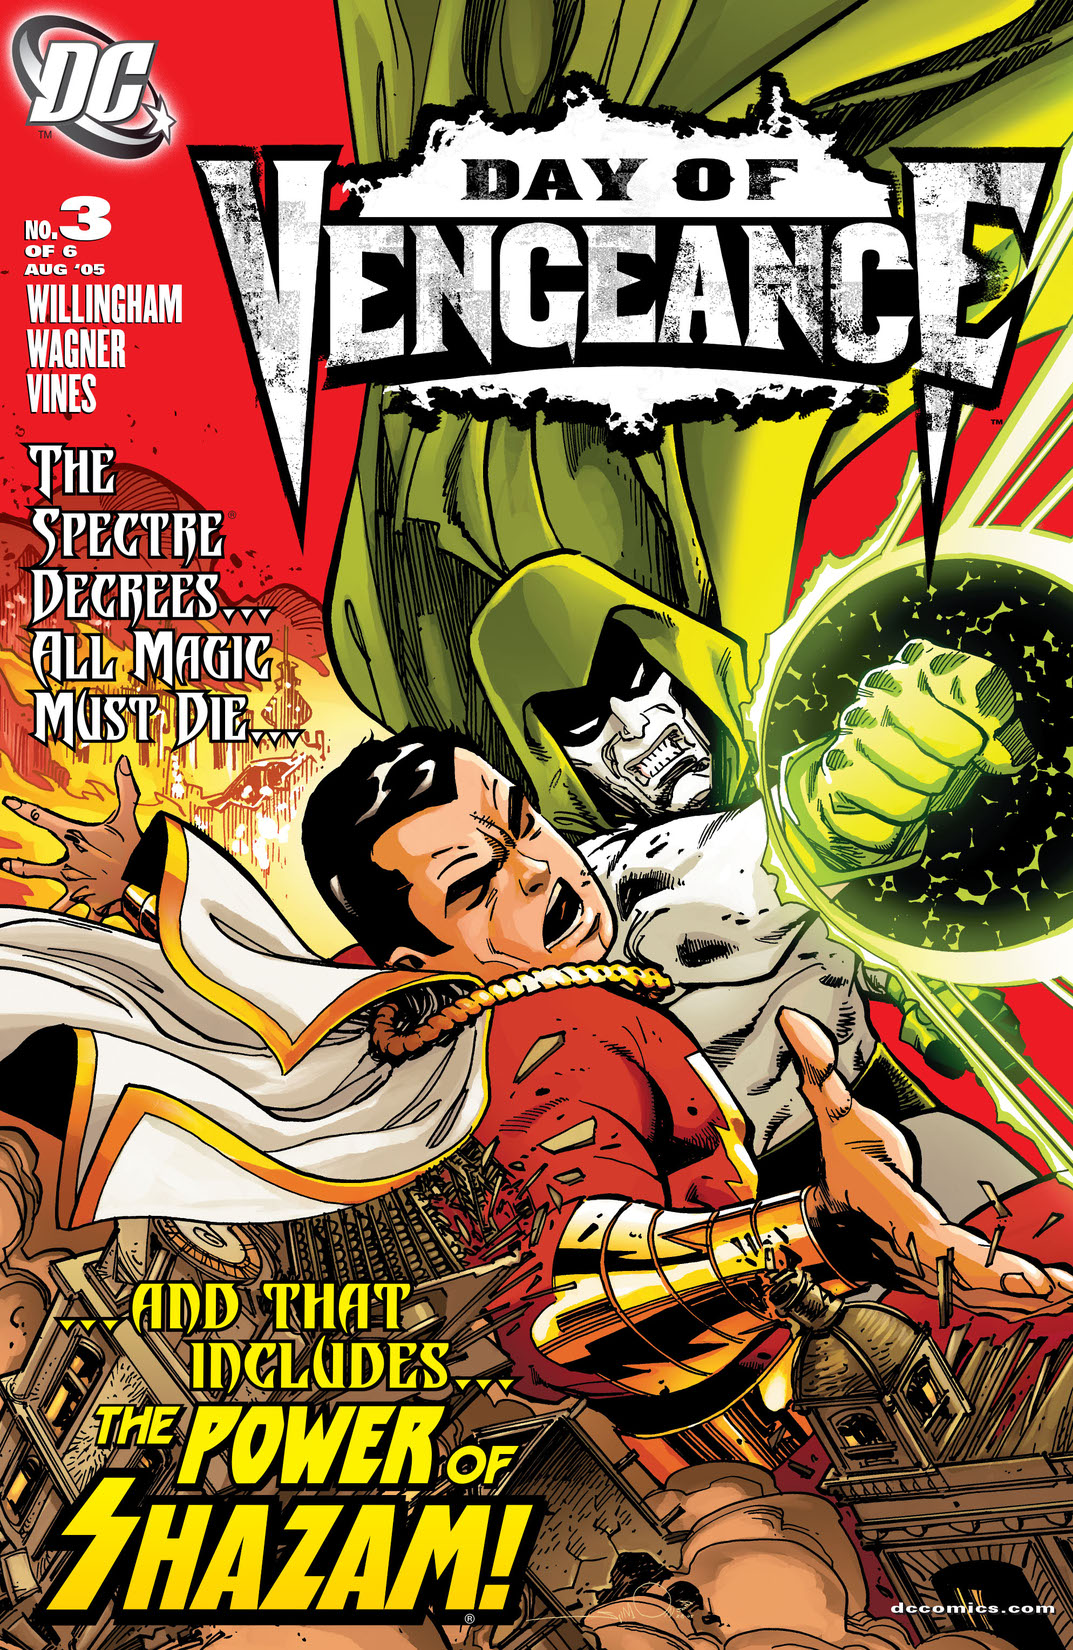 Day of Vengeance #3 preview images